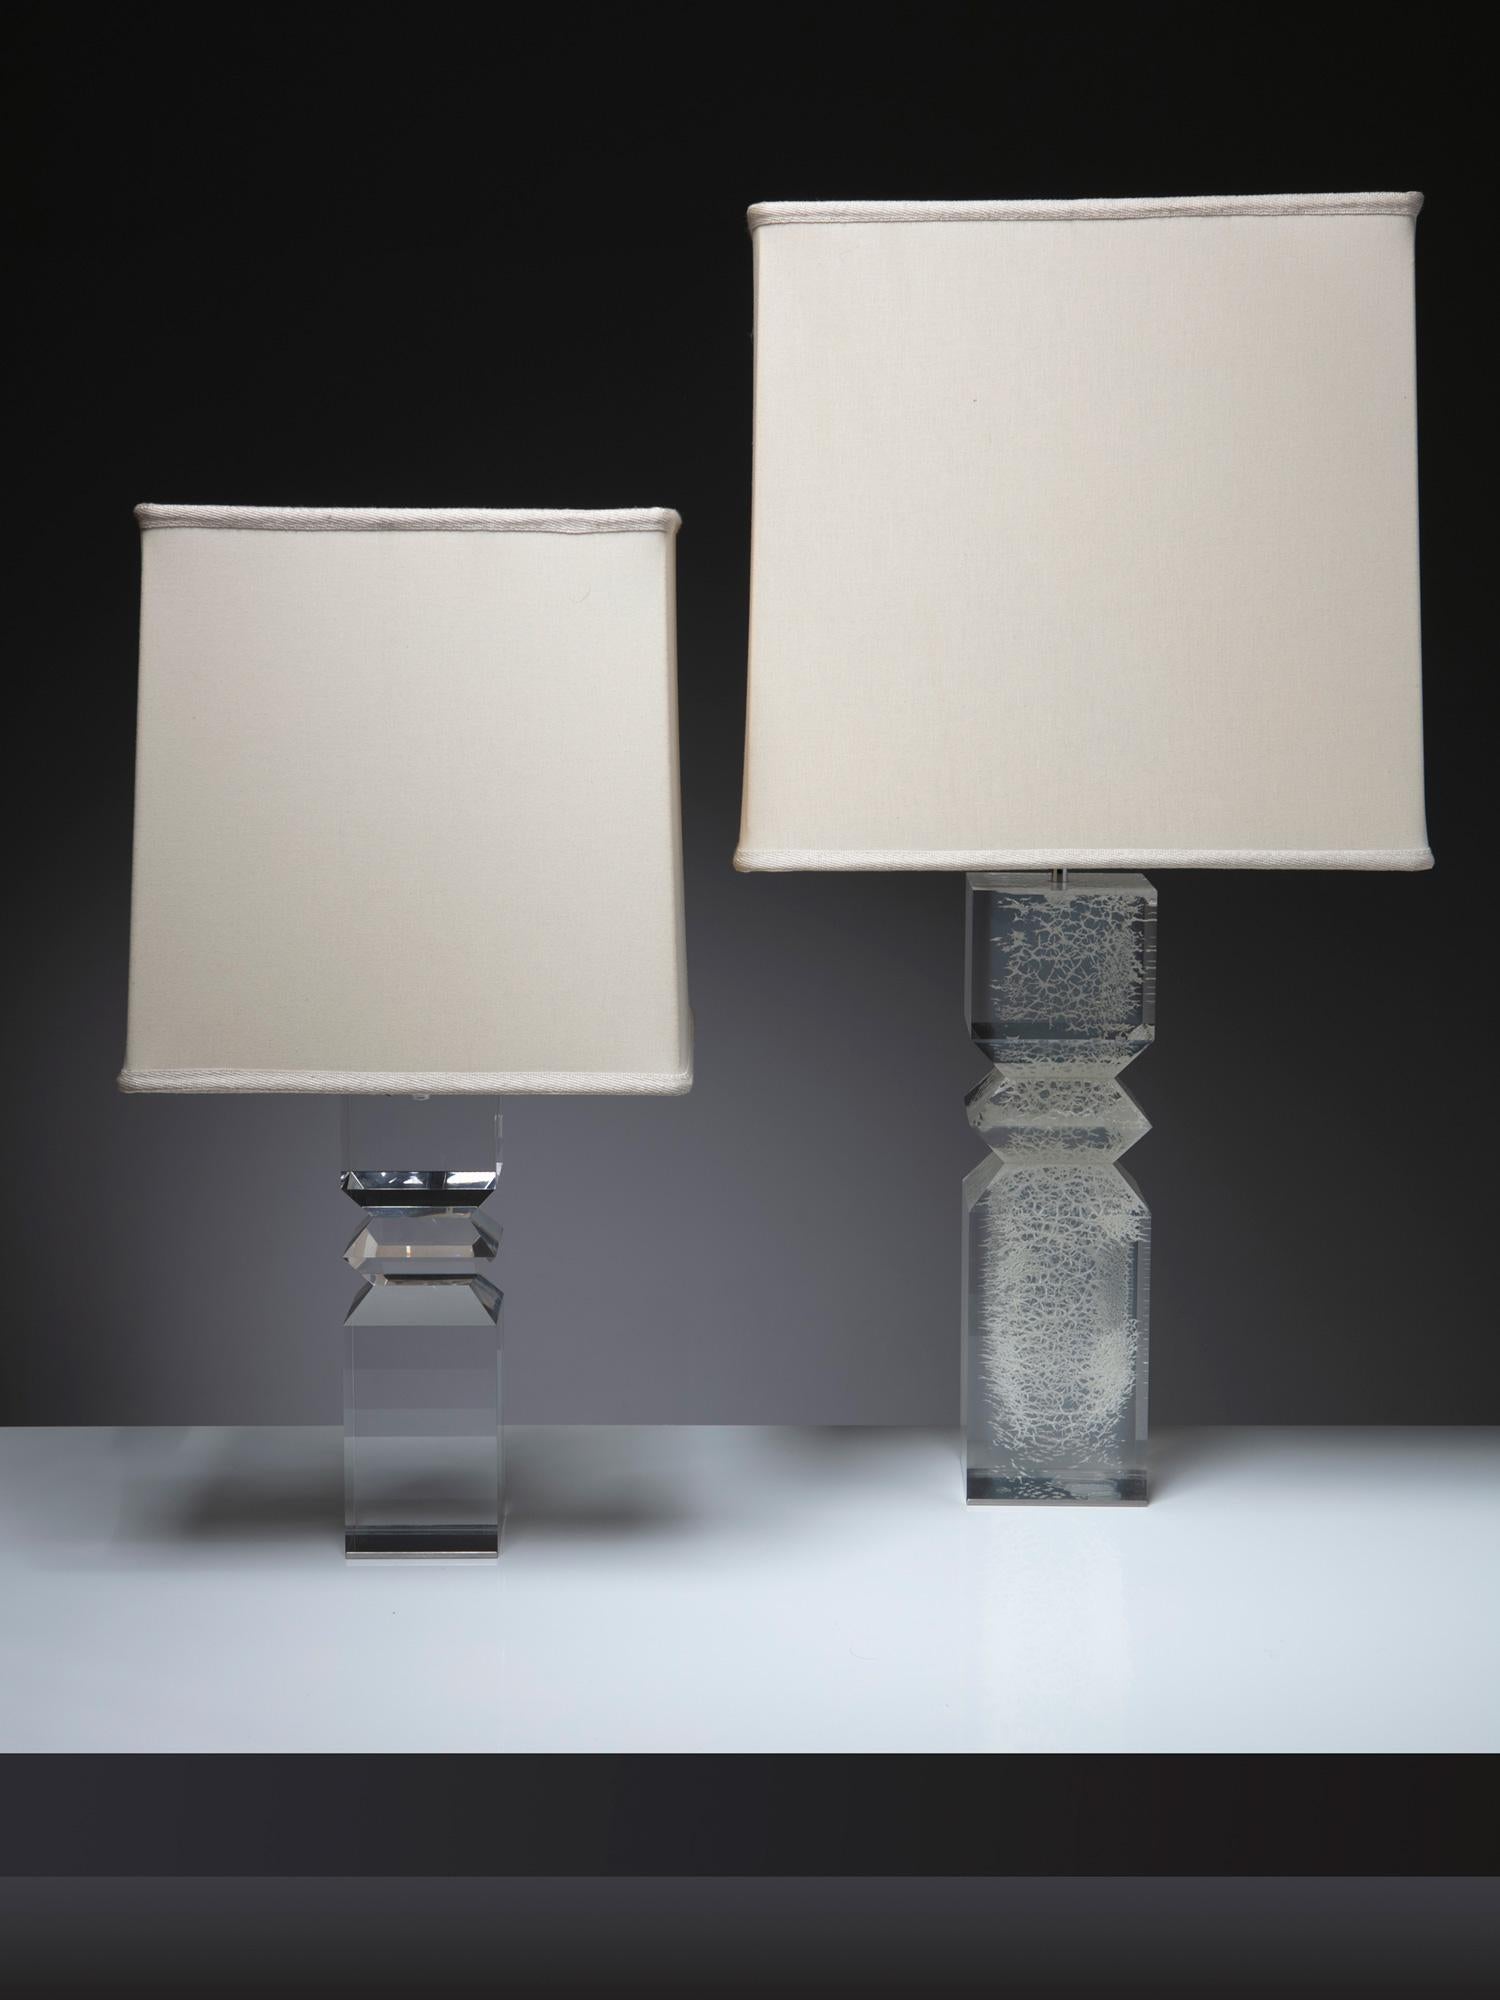 Pair of Plexiglass table lamps by Alessio Tasca for Fusina.
Part of Tasca's sculptural sperimetation for domestic objects, these lamps feature a solid plexiglass body with geometric cuts, aluminum base and a squared shade.
The taller piece shows a